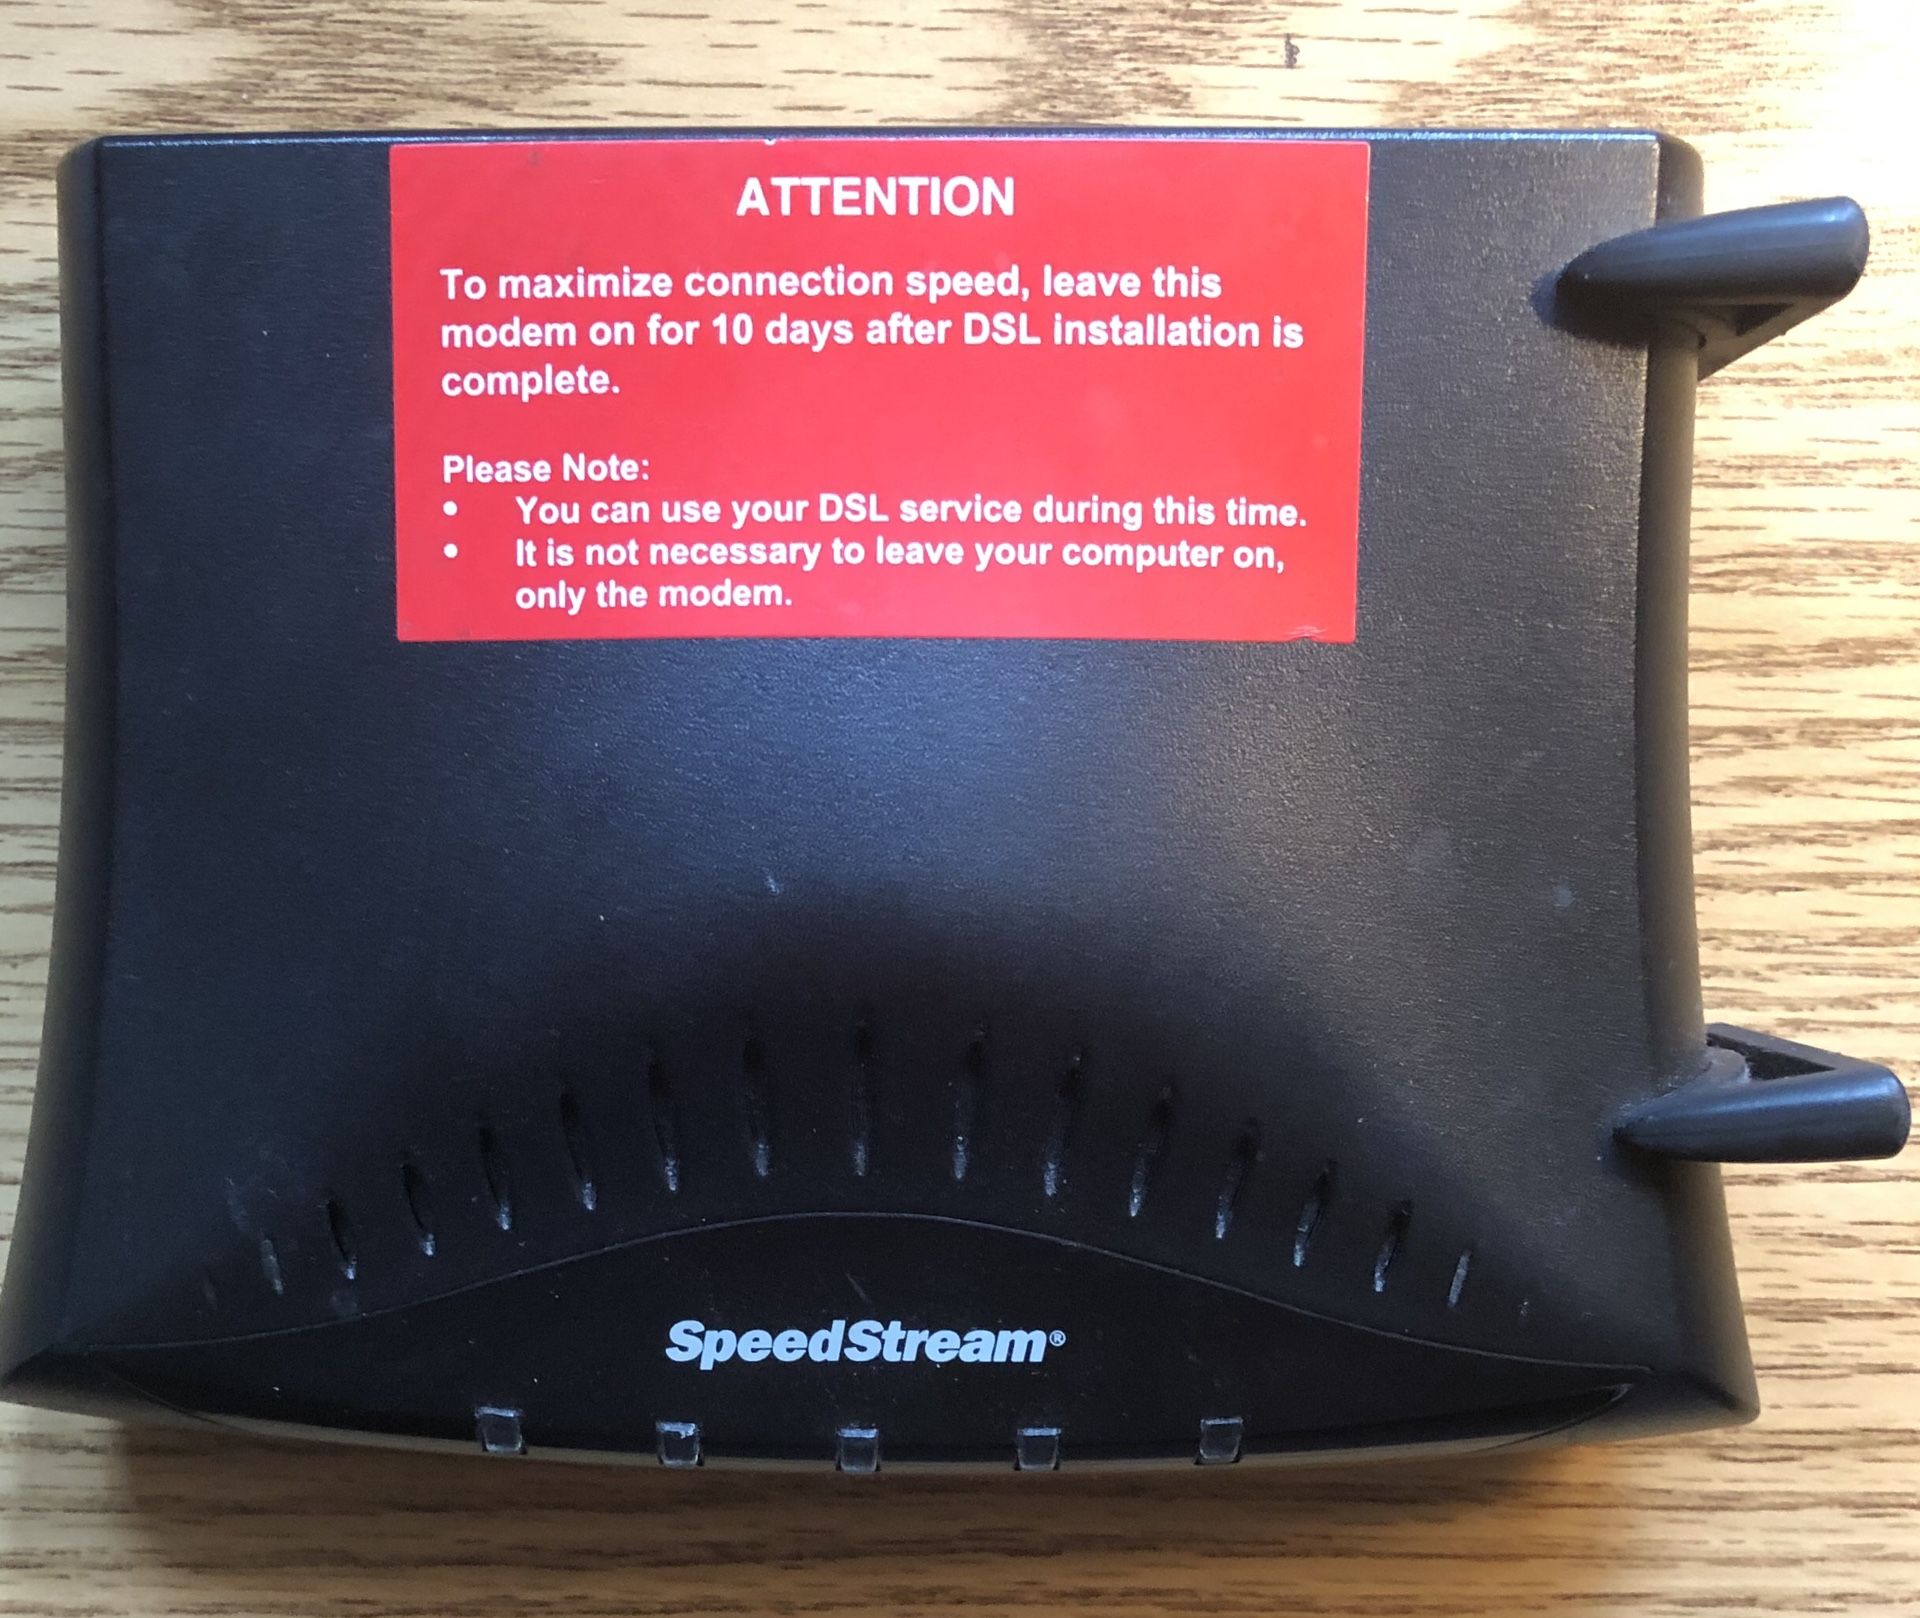 SpeedStream 5100 WiFi Cable Modem Router